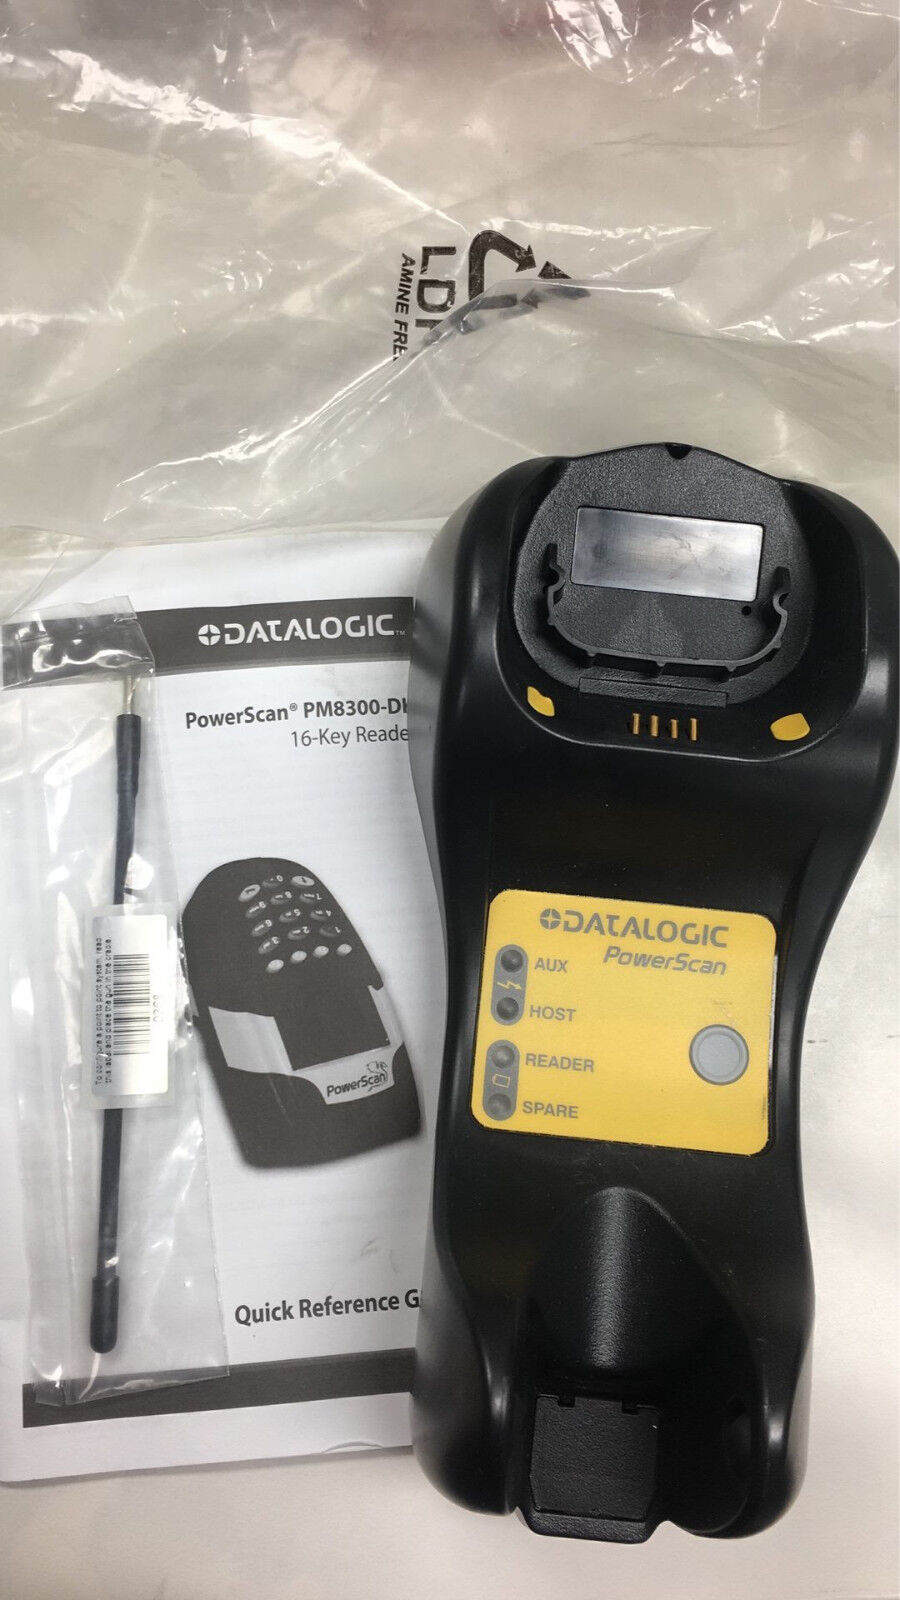 New Datalogic Barcode Scanner Cradle BC8060 910MHZ for M8300 M8500 USB Cable